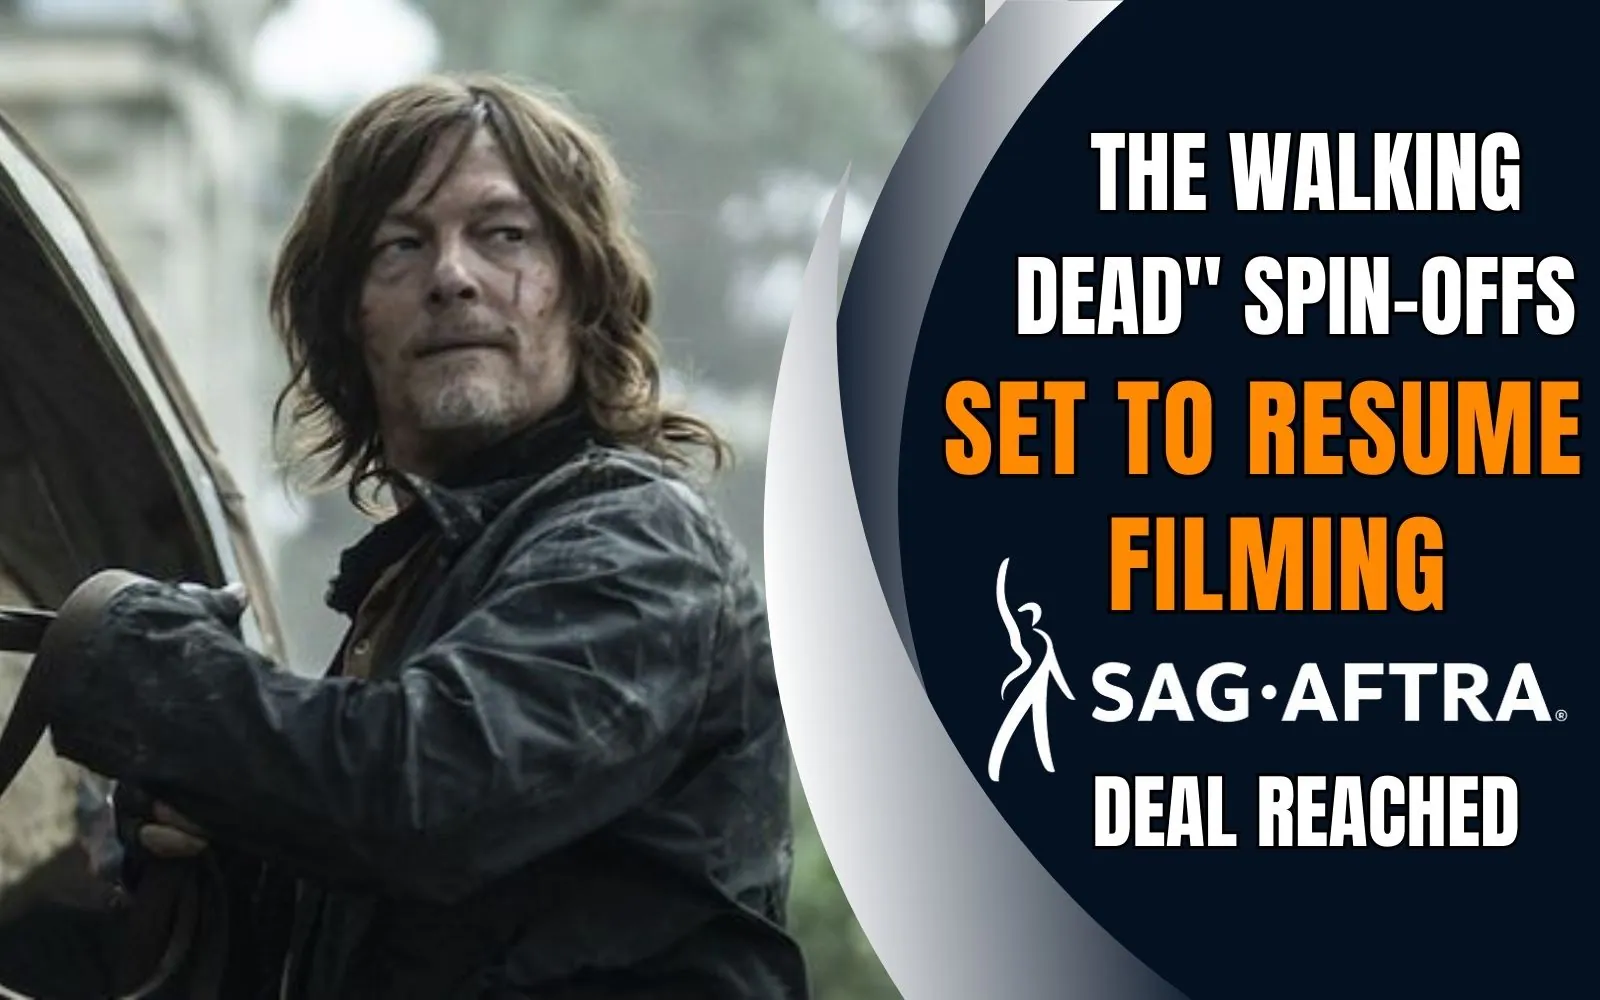 The Walking Dead Spin-Offs Set to Resume Filming After Strike Deal Reached